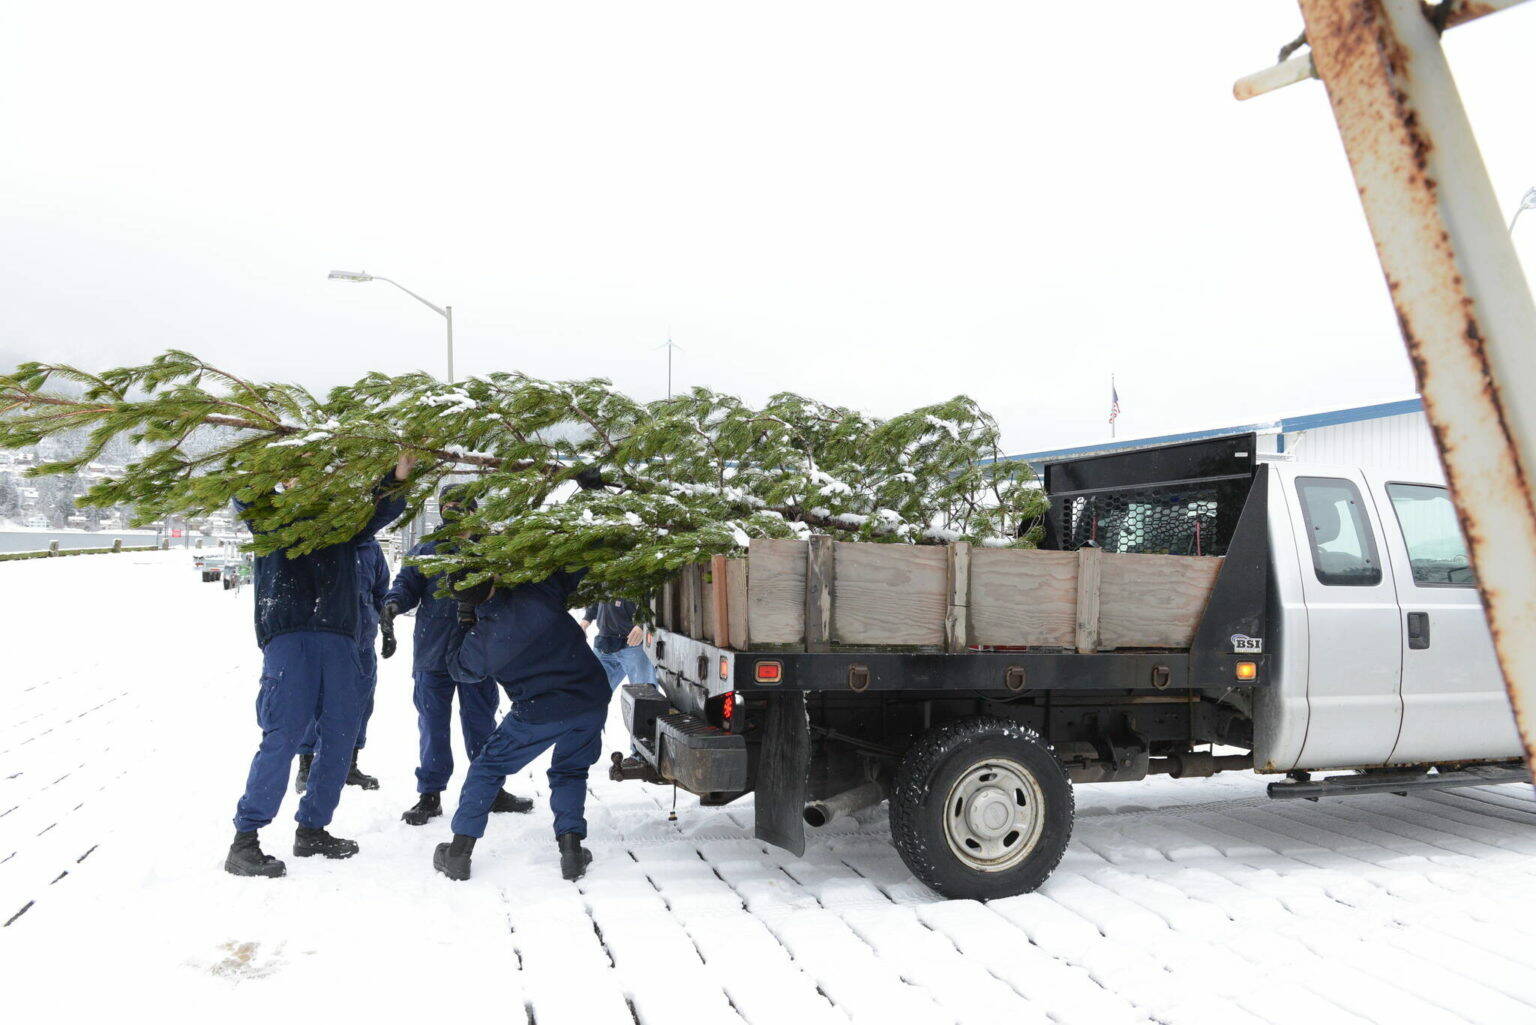 Coast Guardsmen and state employees load the Together Tree bound for the Alaska Governor’s Mansion on a truck on Nov. 29, 2021. The annual open house at the governor’s mansion is back this year, after having been suspended last year due to COVID-19. (USCG photo / Petty Officer 2nd Class Lexie Preston)